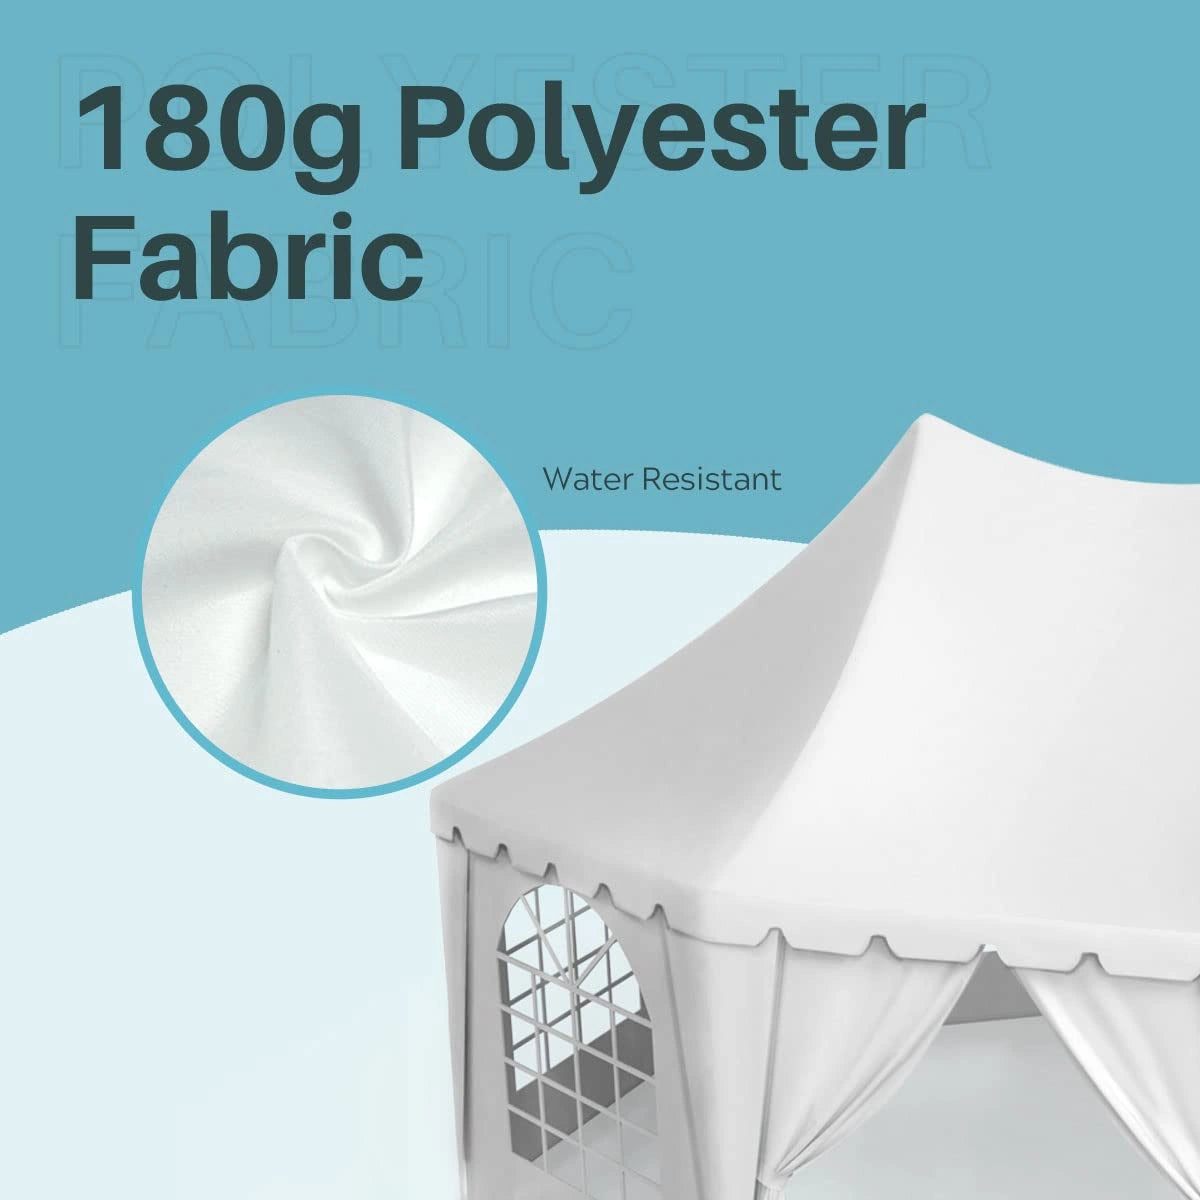 180g Polyester Fabric